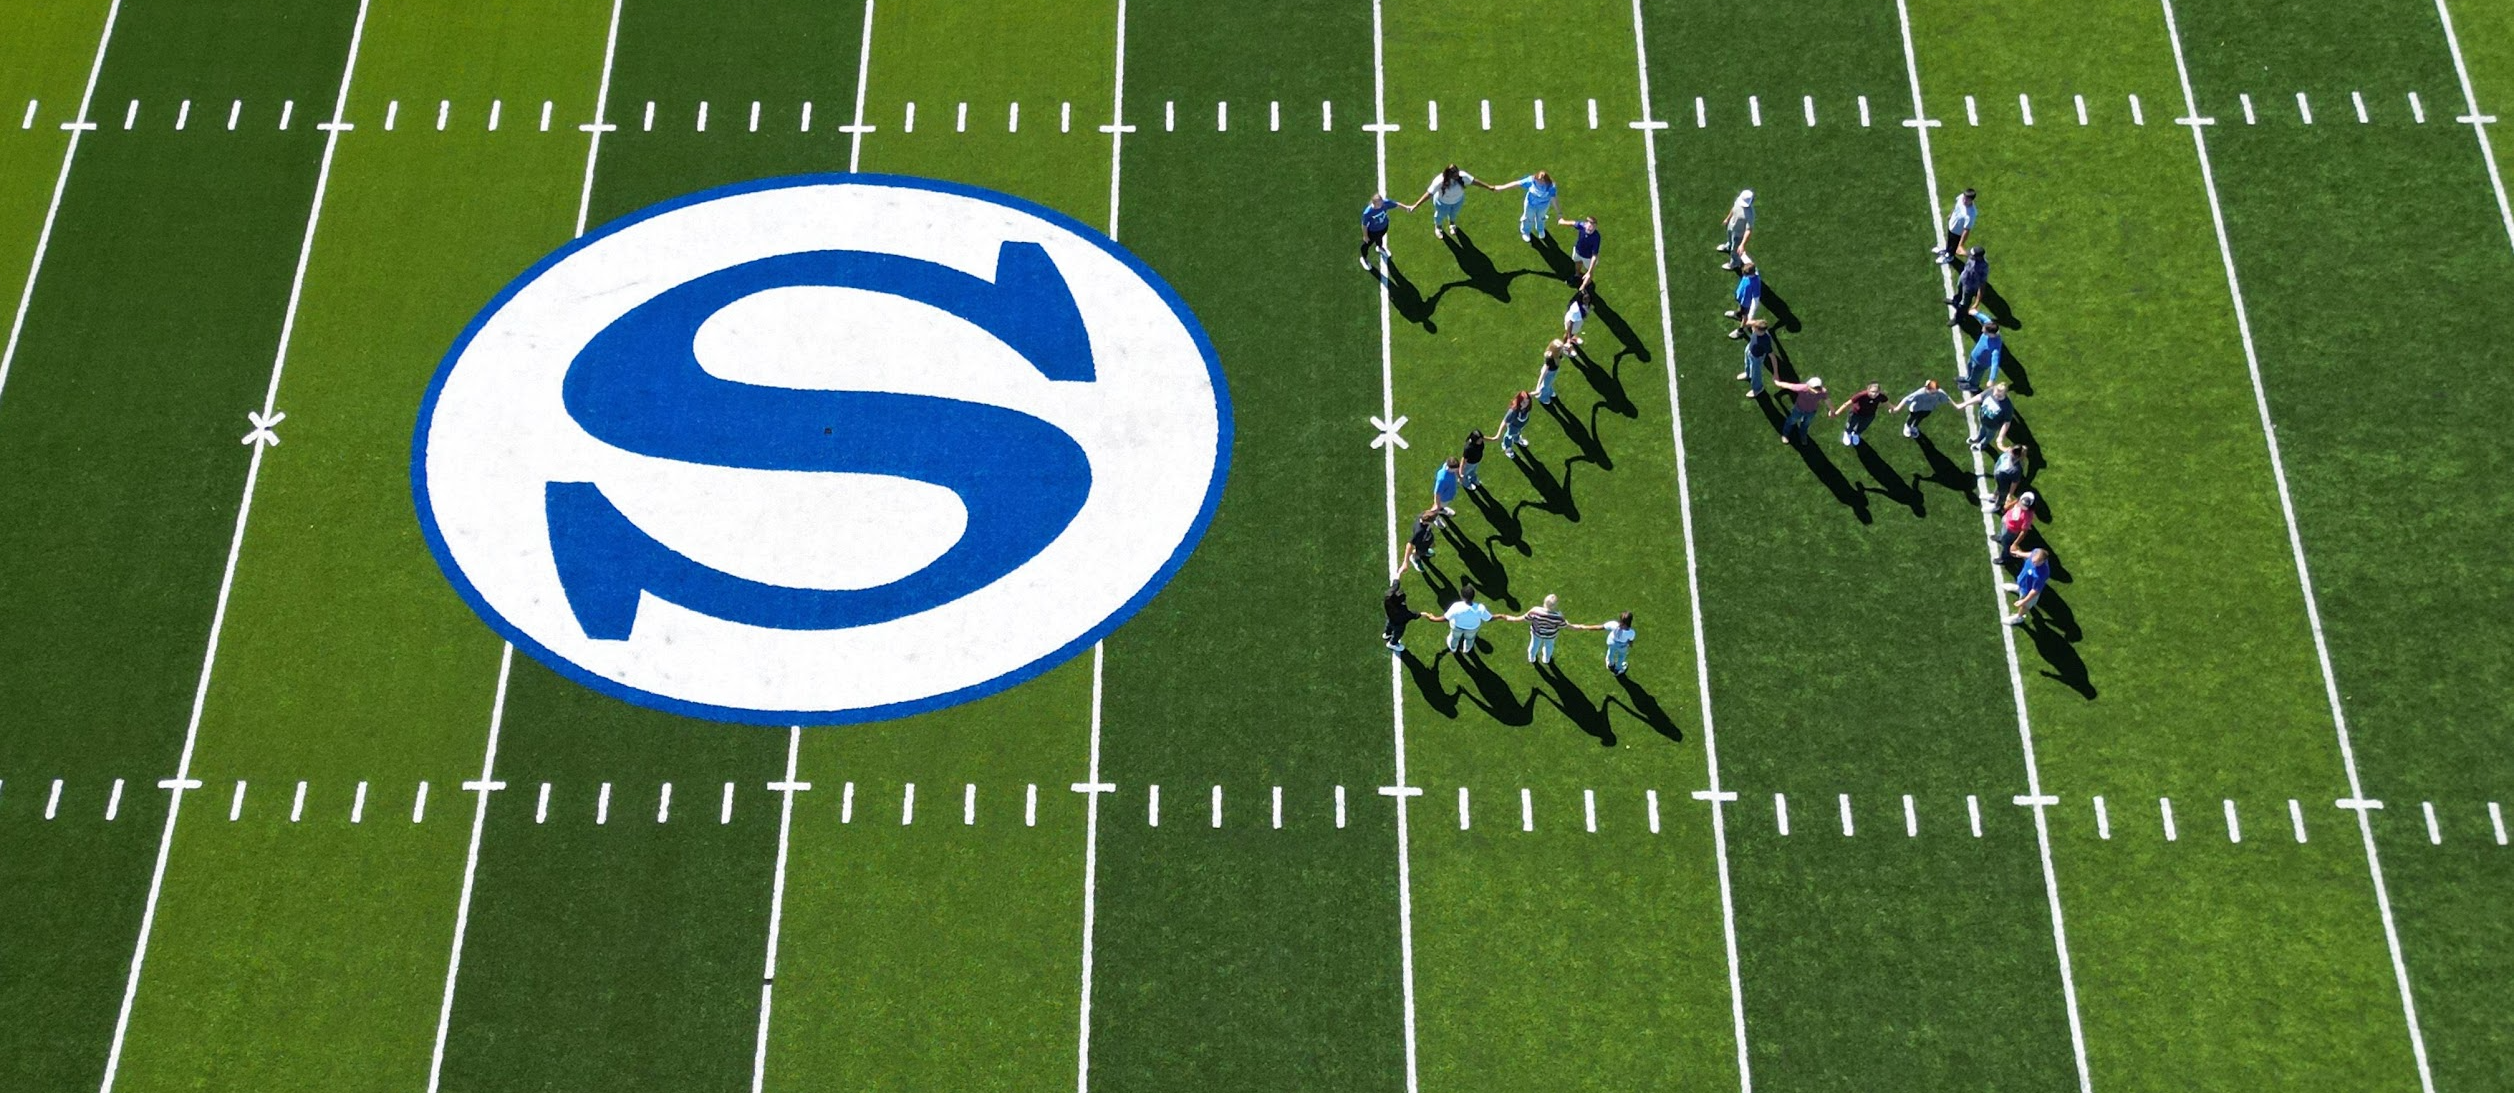 Aerial drone picture of the Class of 2024 spelling out 24 on football field